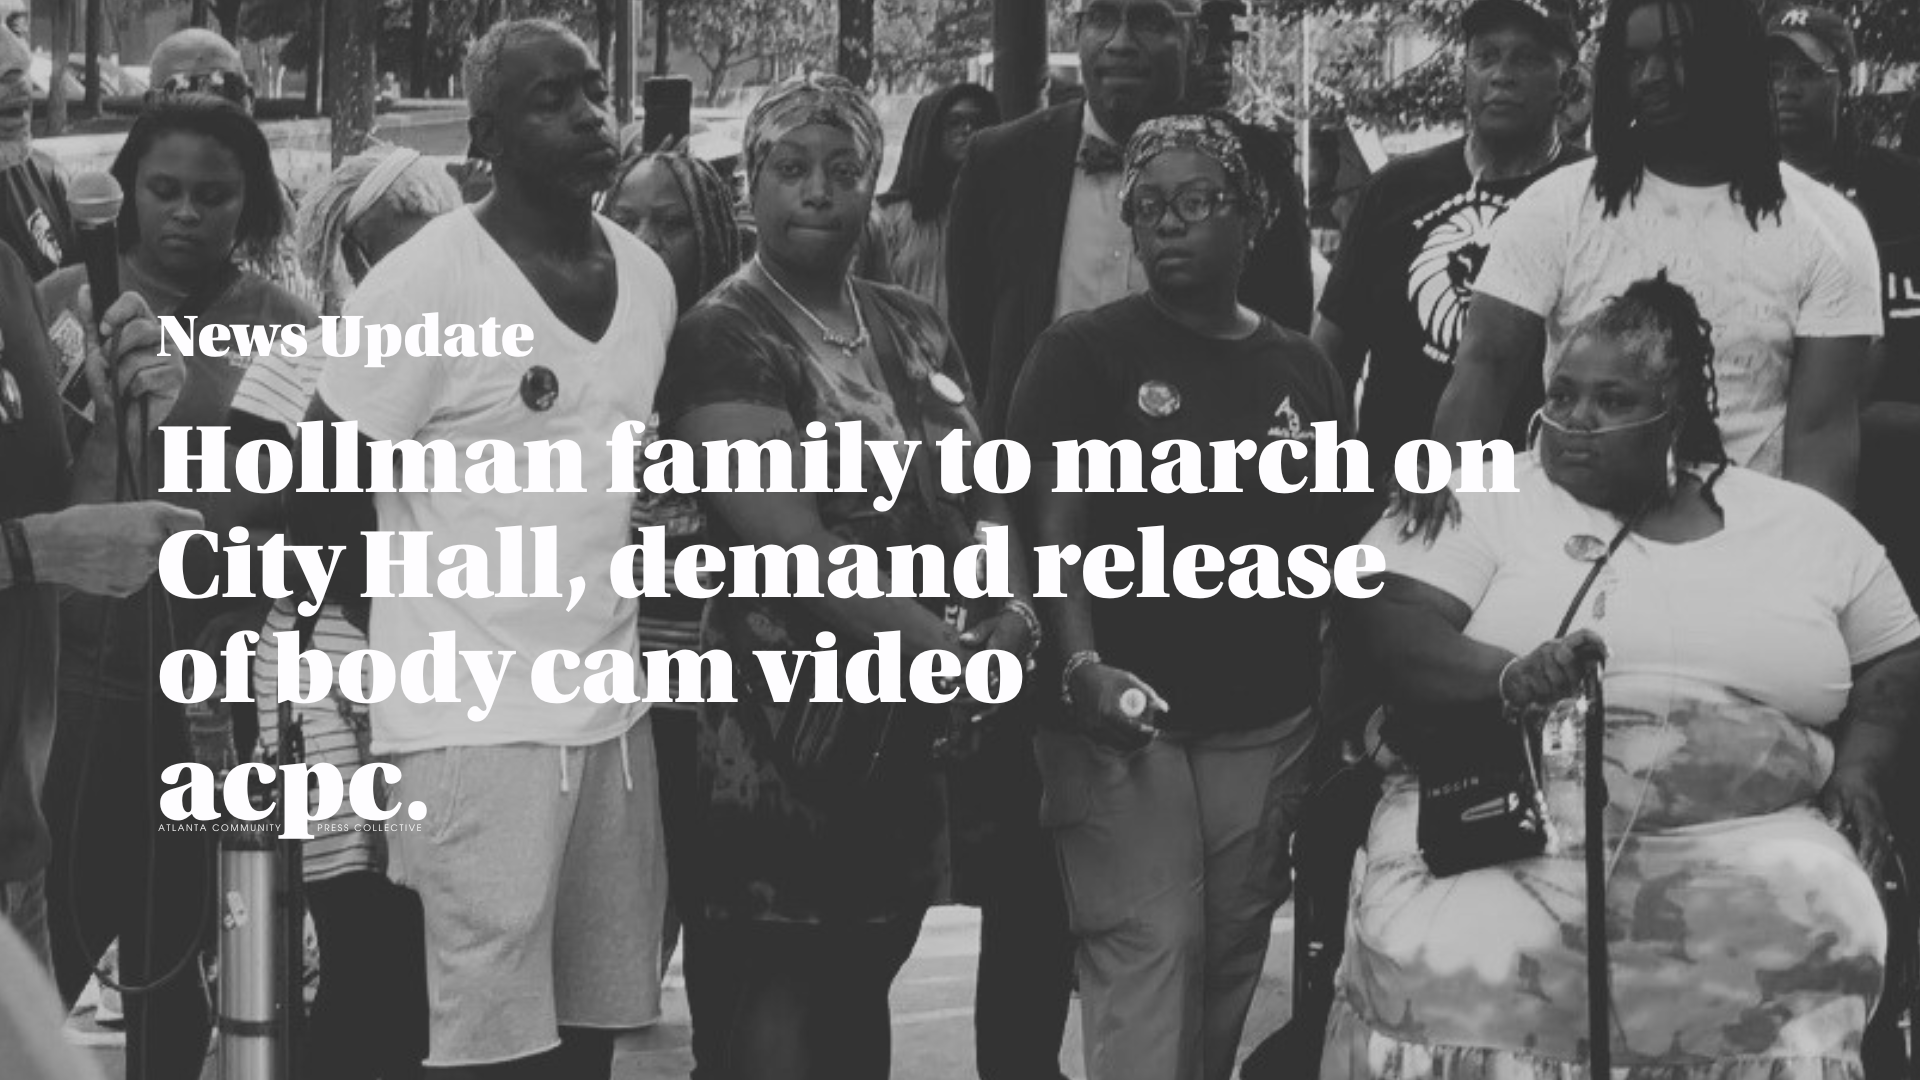 Hollman family to march on City Hall, demand release of body cam video